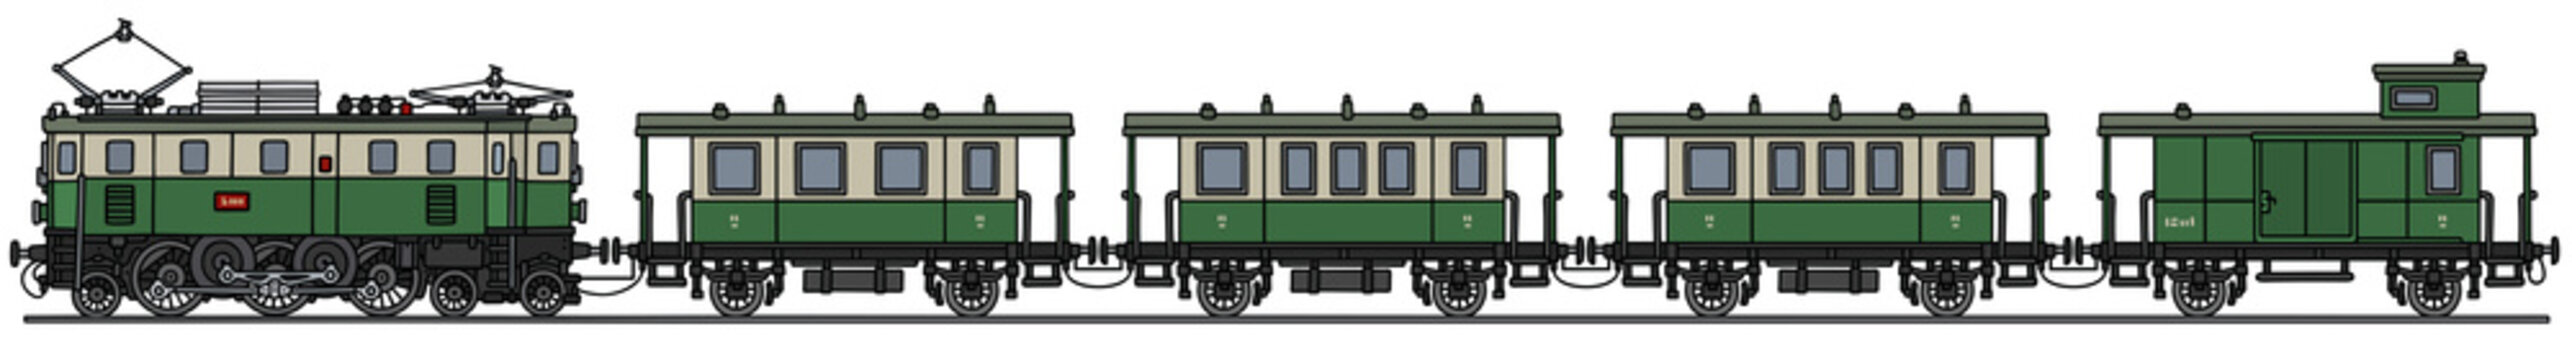 Old electric train / Hand drawing, vector illustration